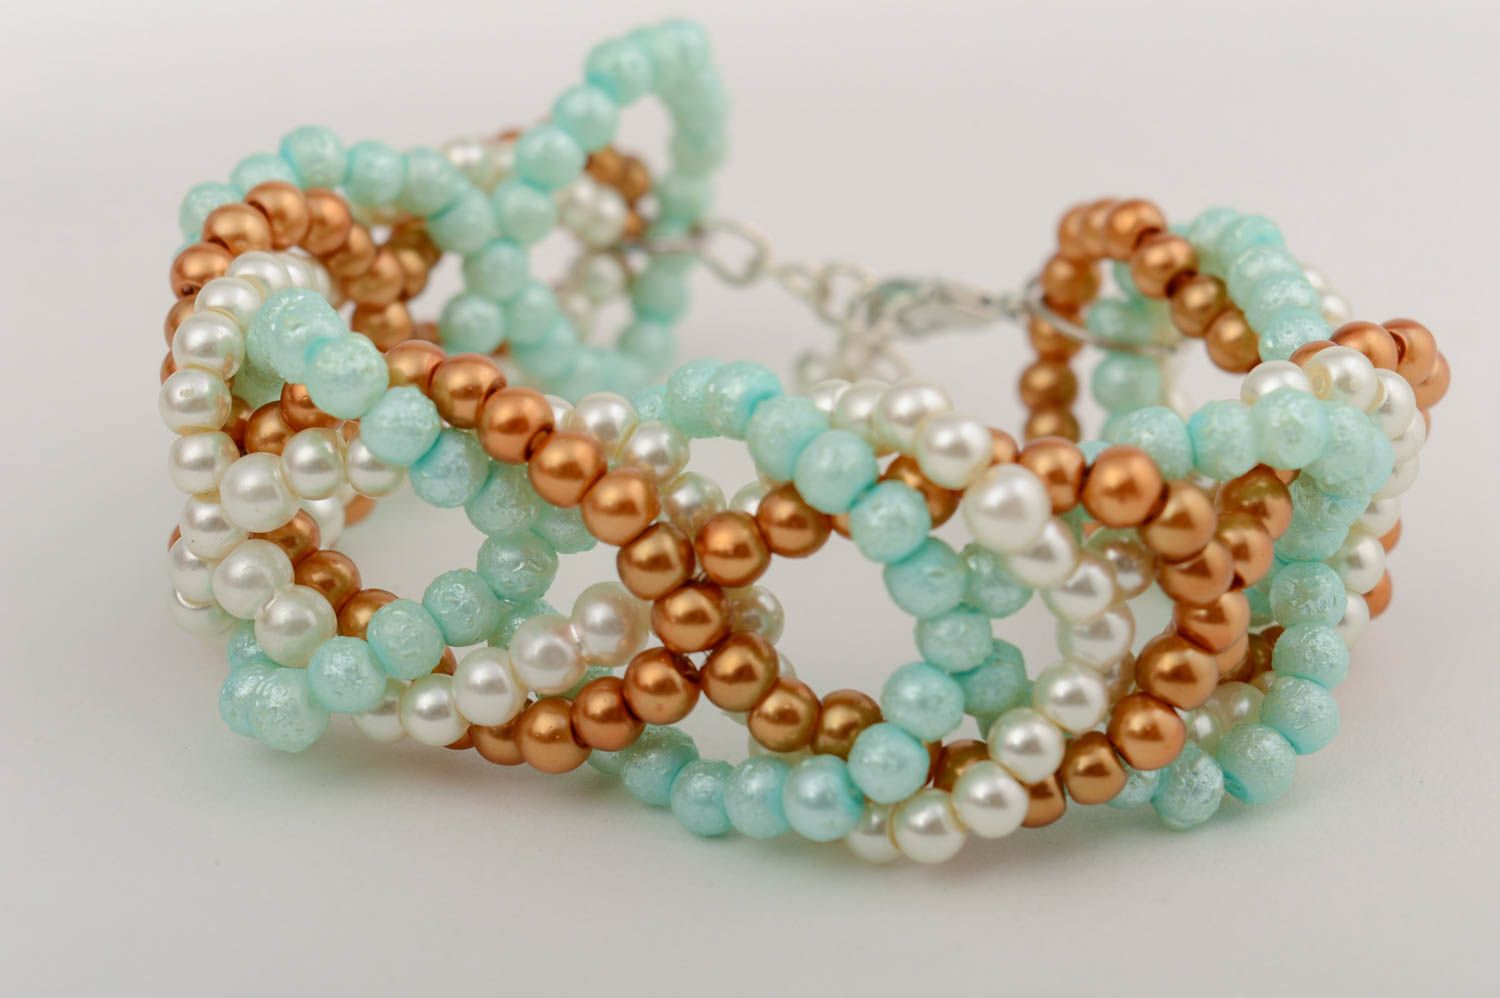 Handmade woven wrist bracelet with colorful light ceramic pearls for women photo 2